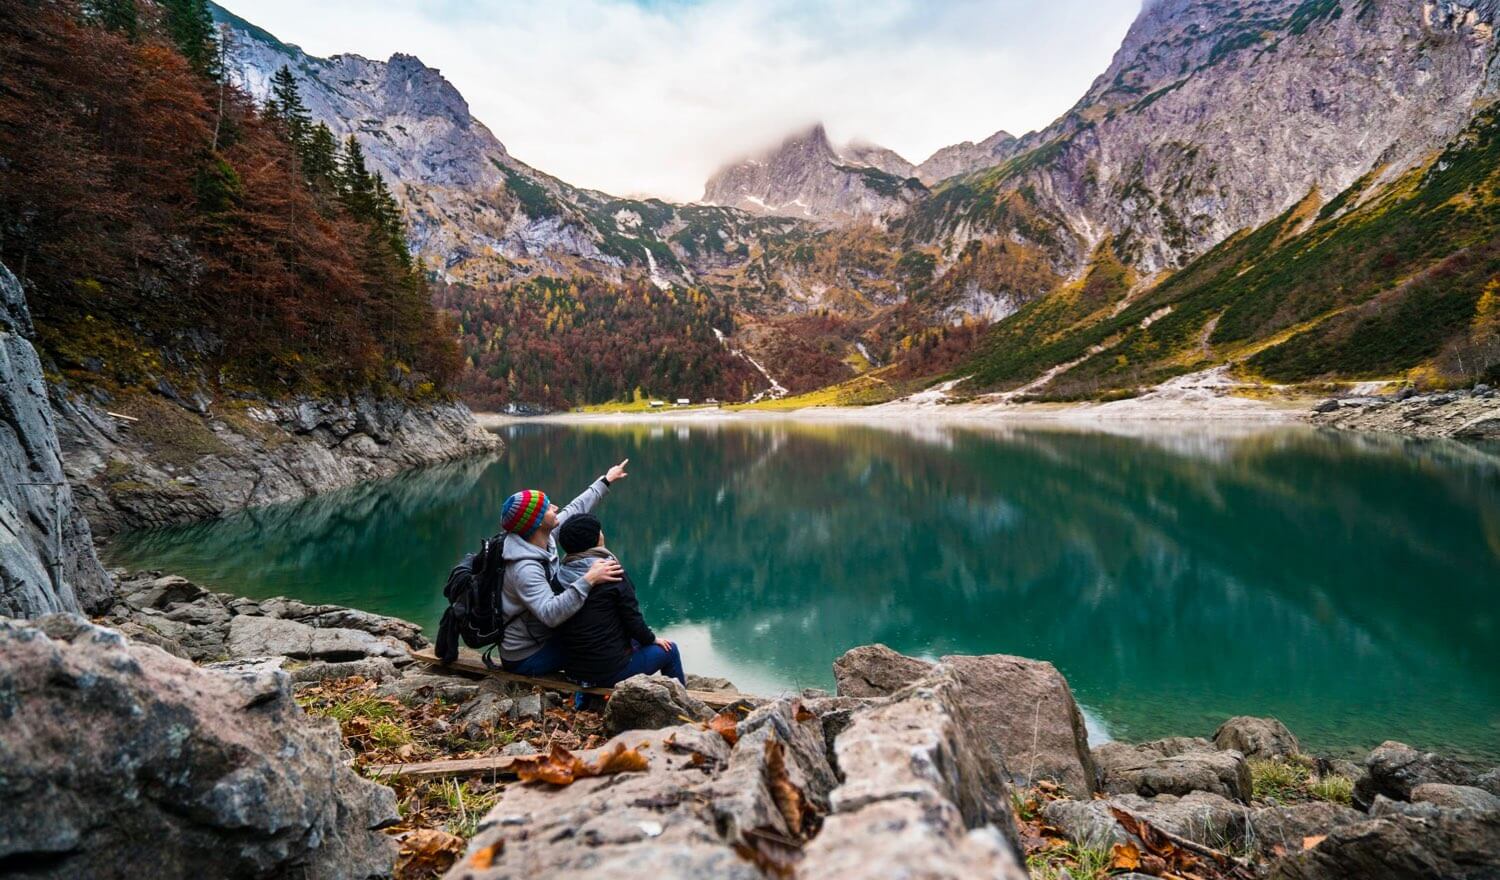 A couple looking out over a beautiful lake